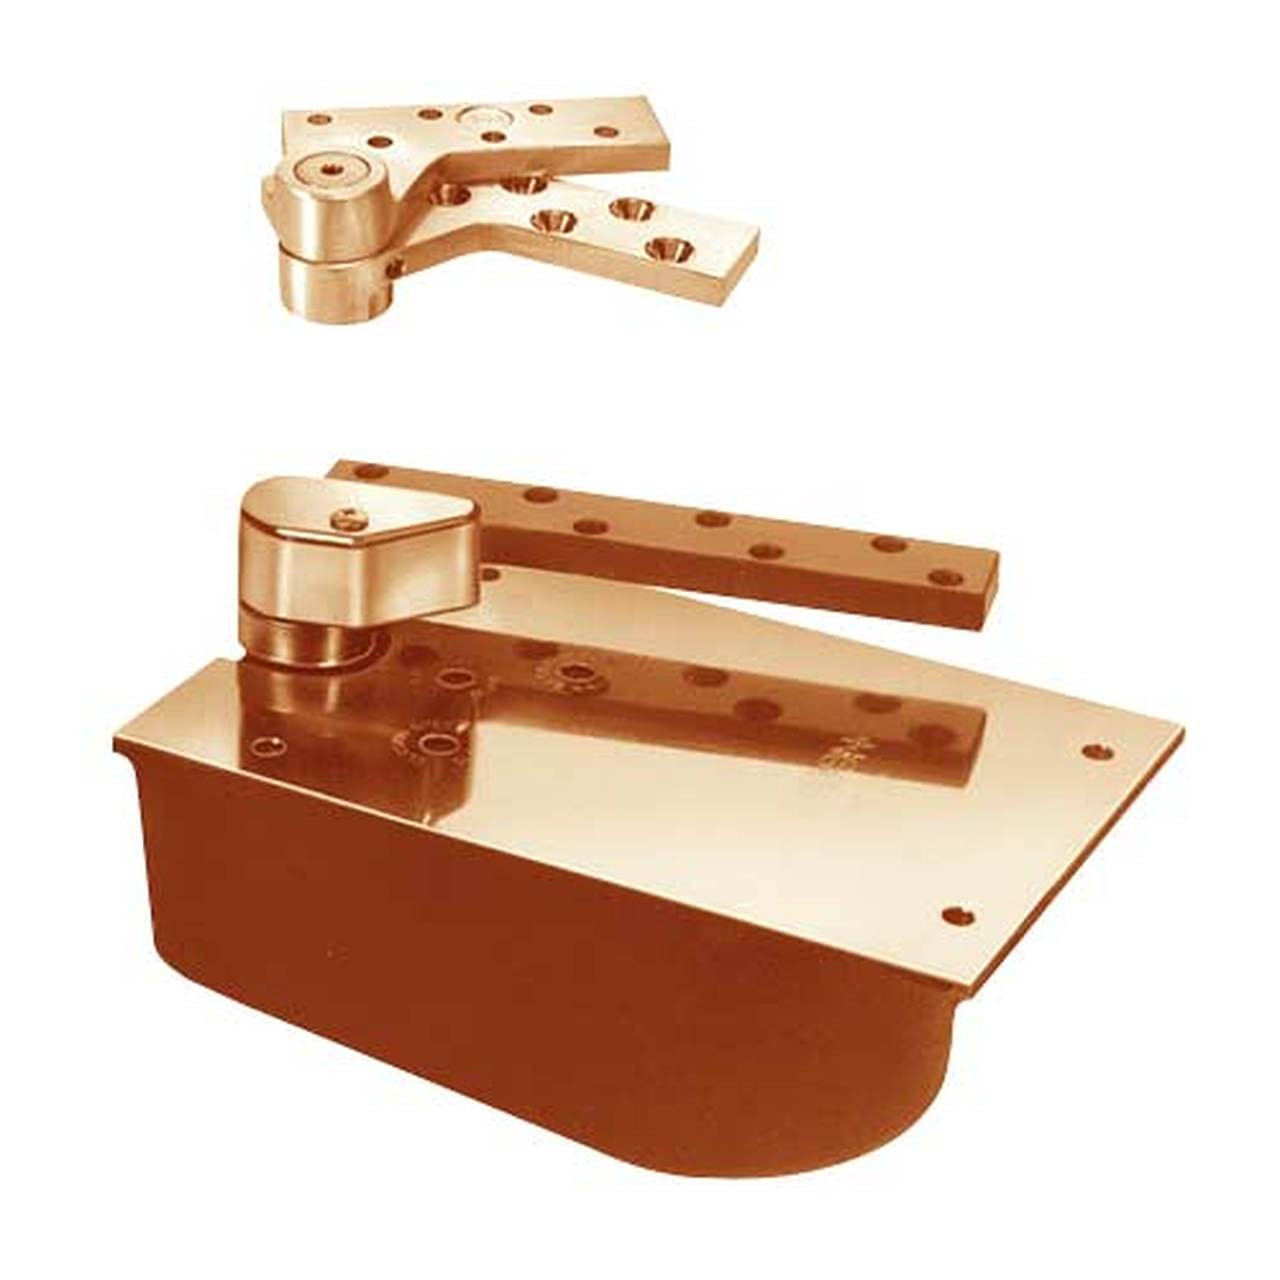 L27-95N-LFP-LCC-LH-2-1/4-612 Rixson 27 Series Extra Heavy Duty Lead Lined Offset Floor Closer in Satin Bronze Finish